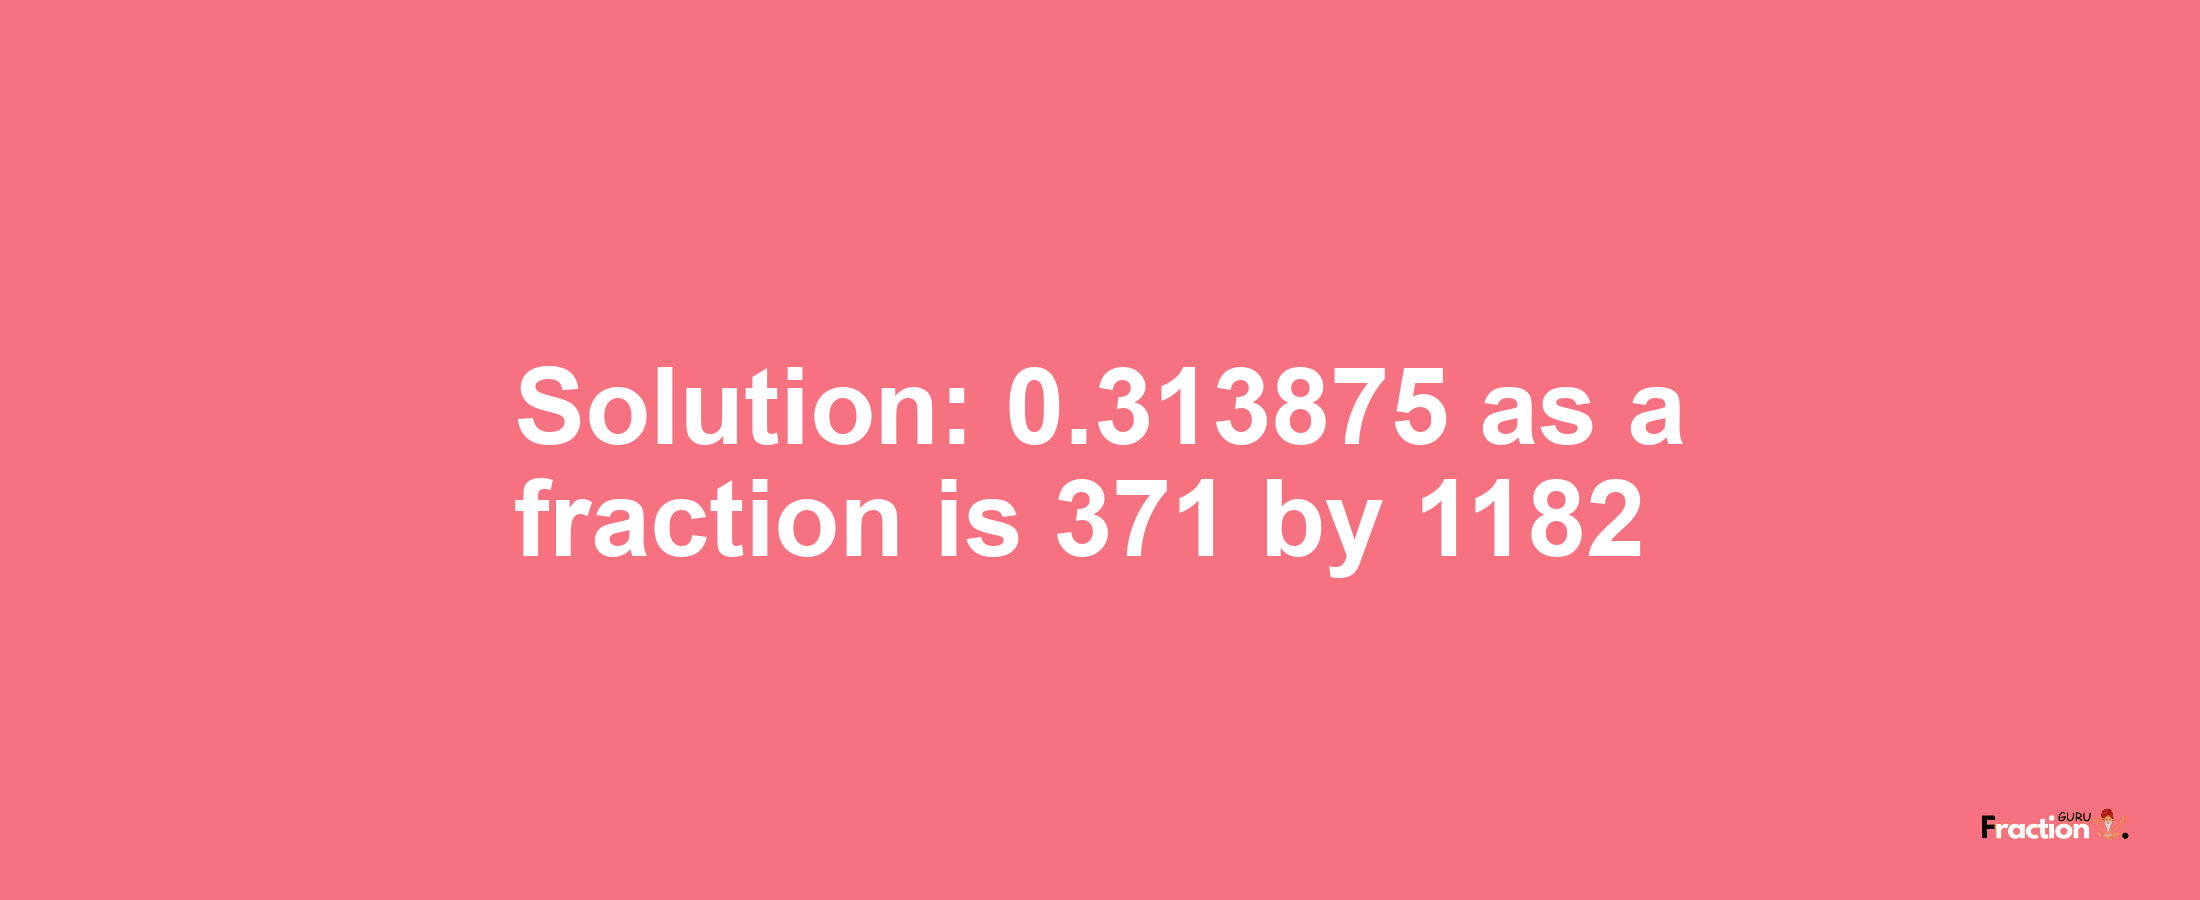 Solution:0.313875 as a fraction is 371/1182